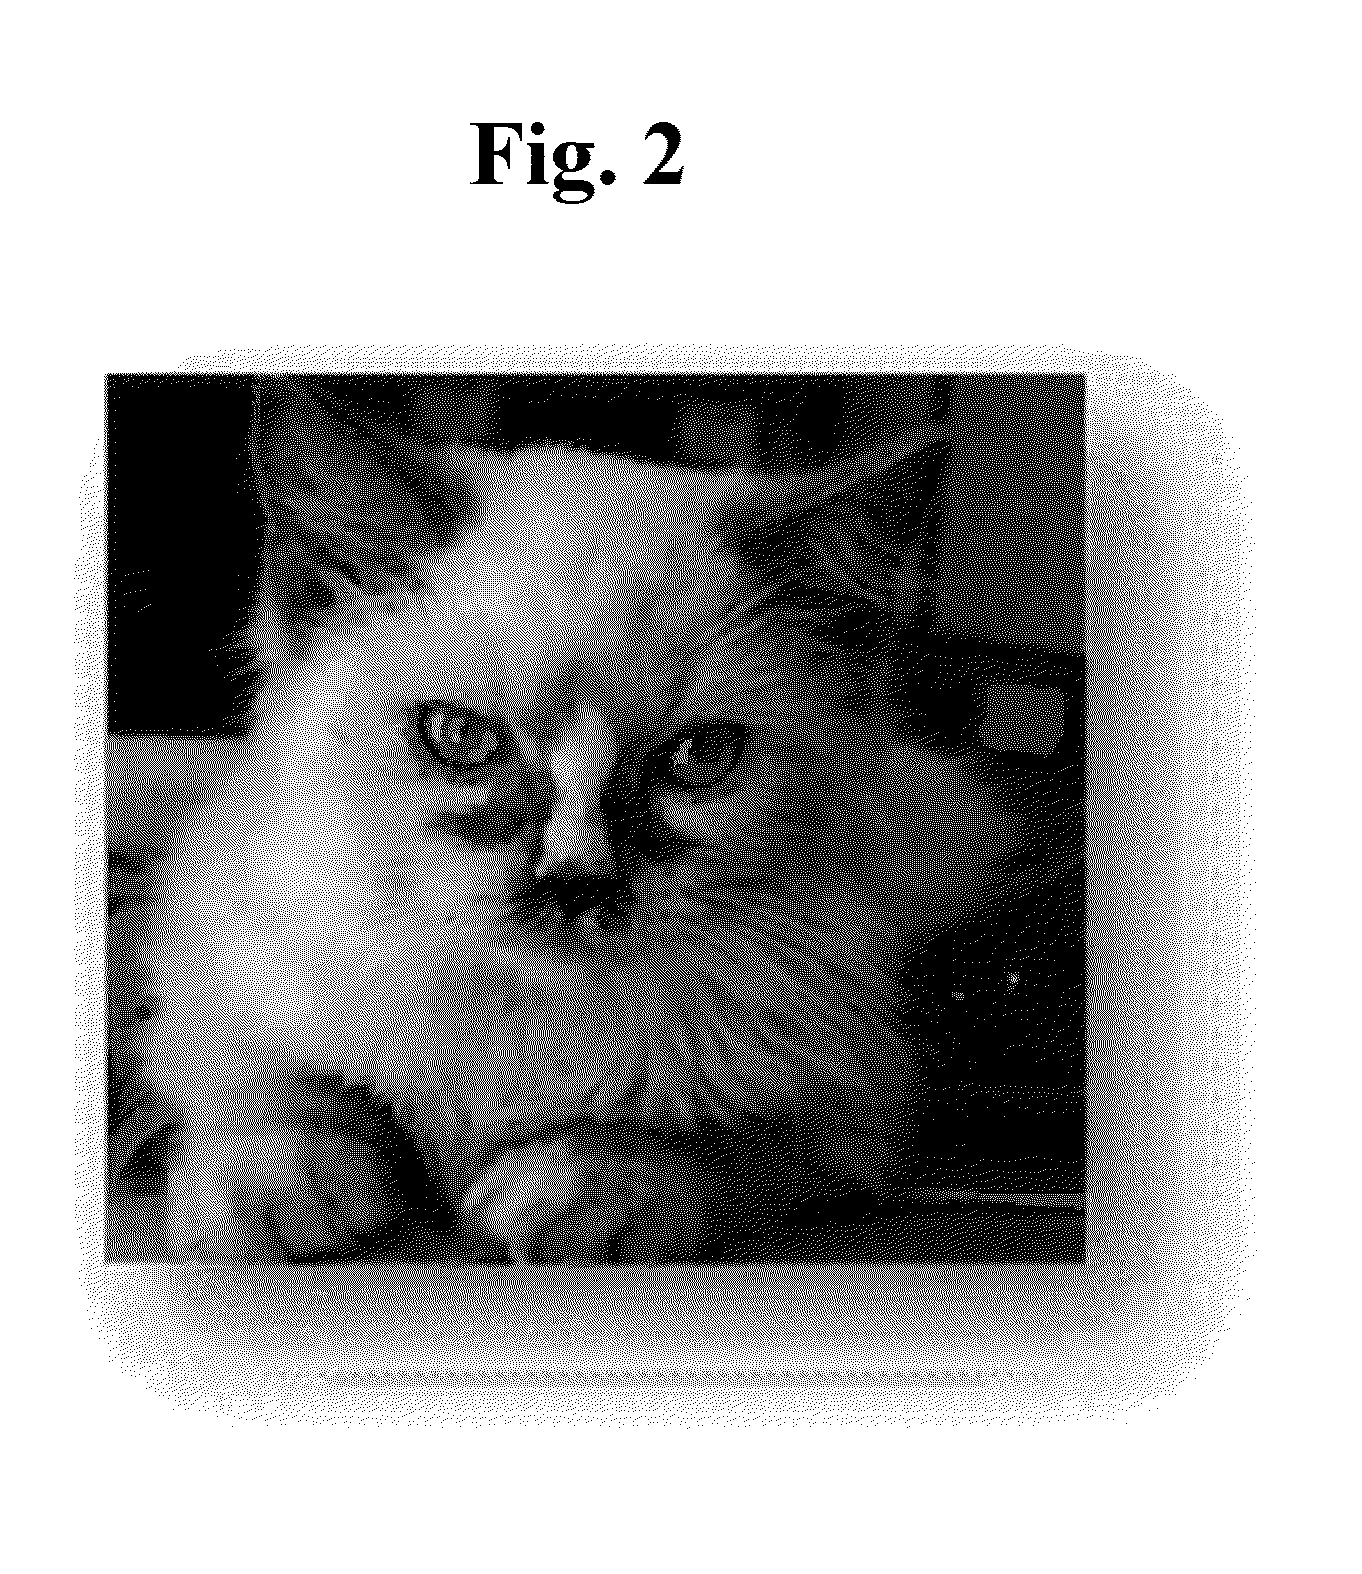 Compositions, methods, and devices for the treatment of eye stain